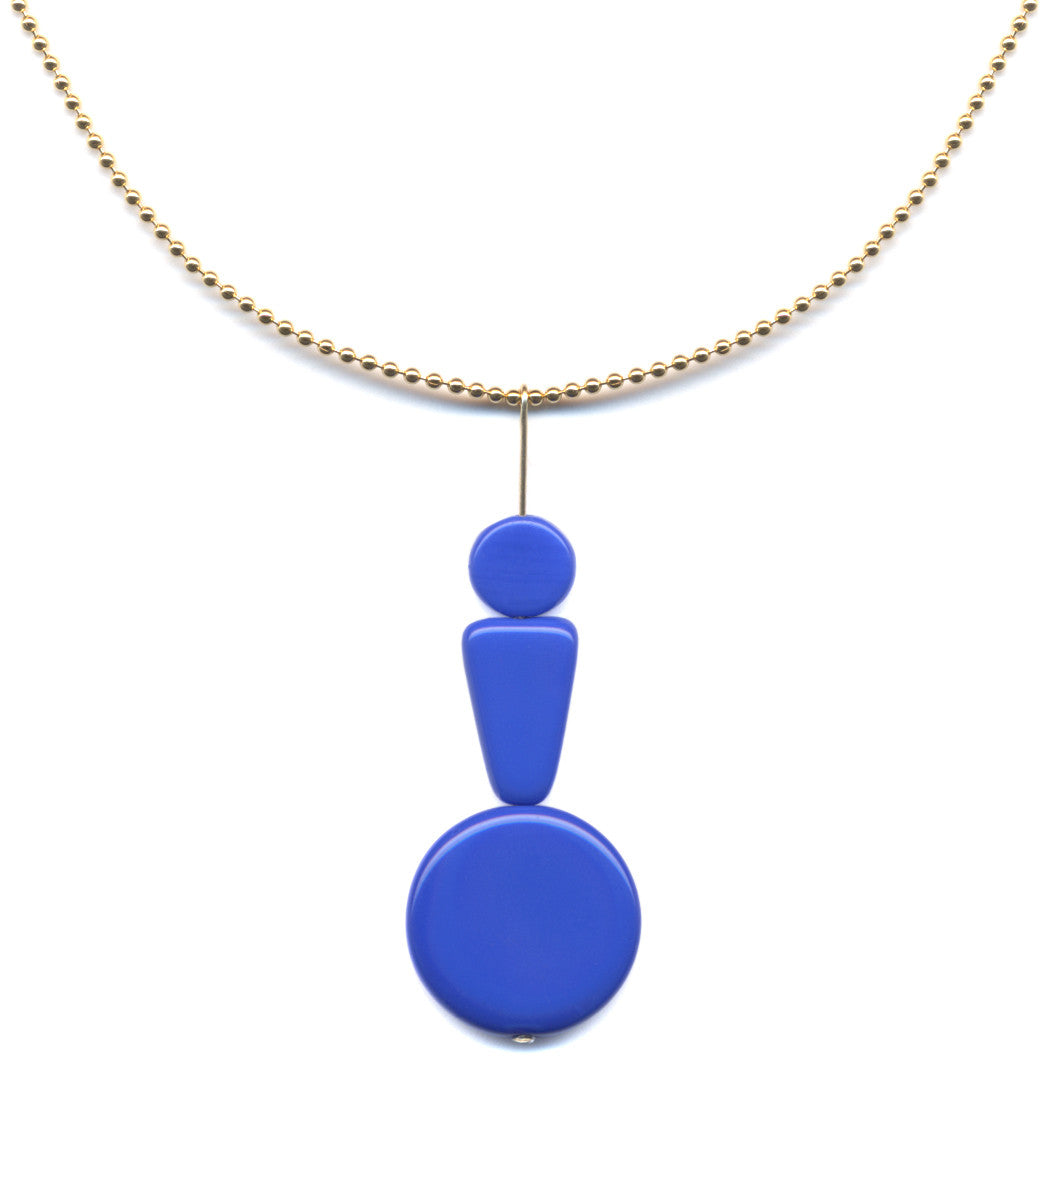 N1969 Yves Klein Blue Necklace